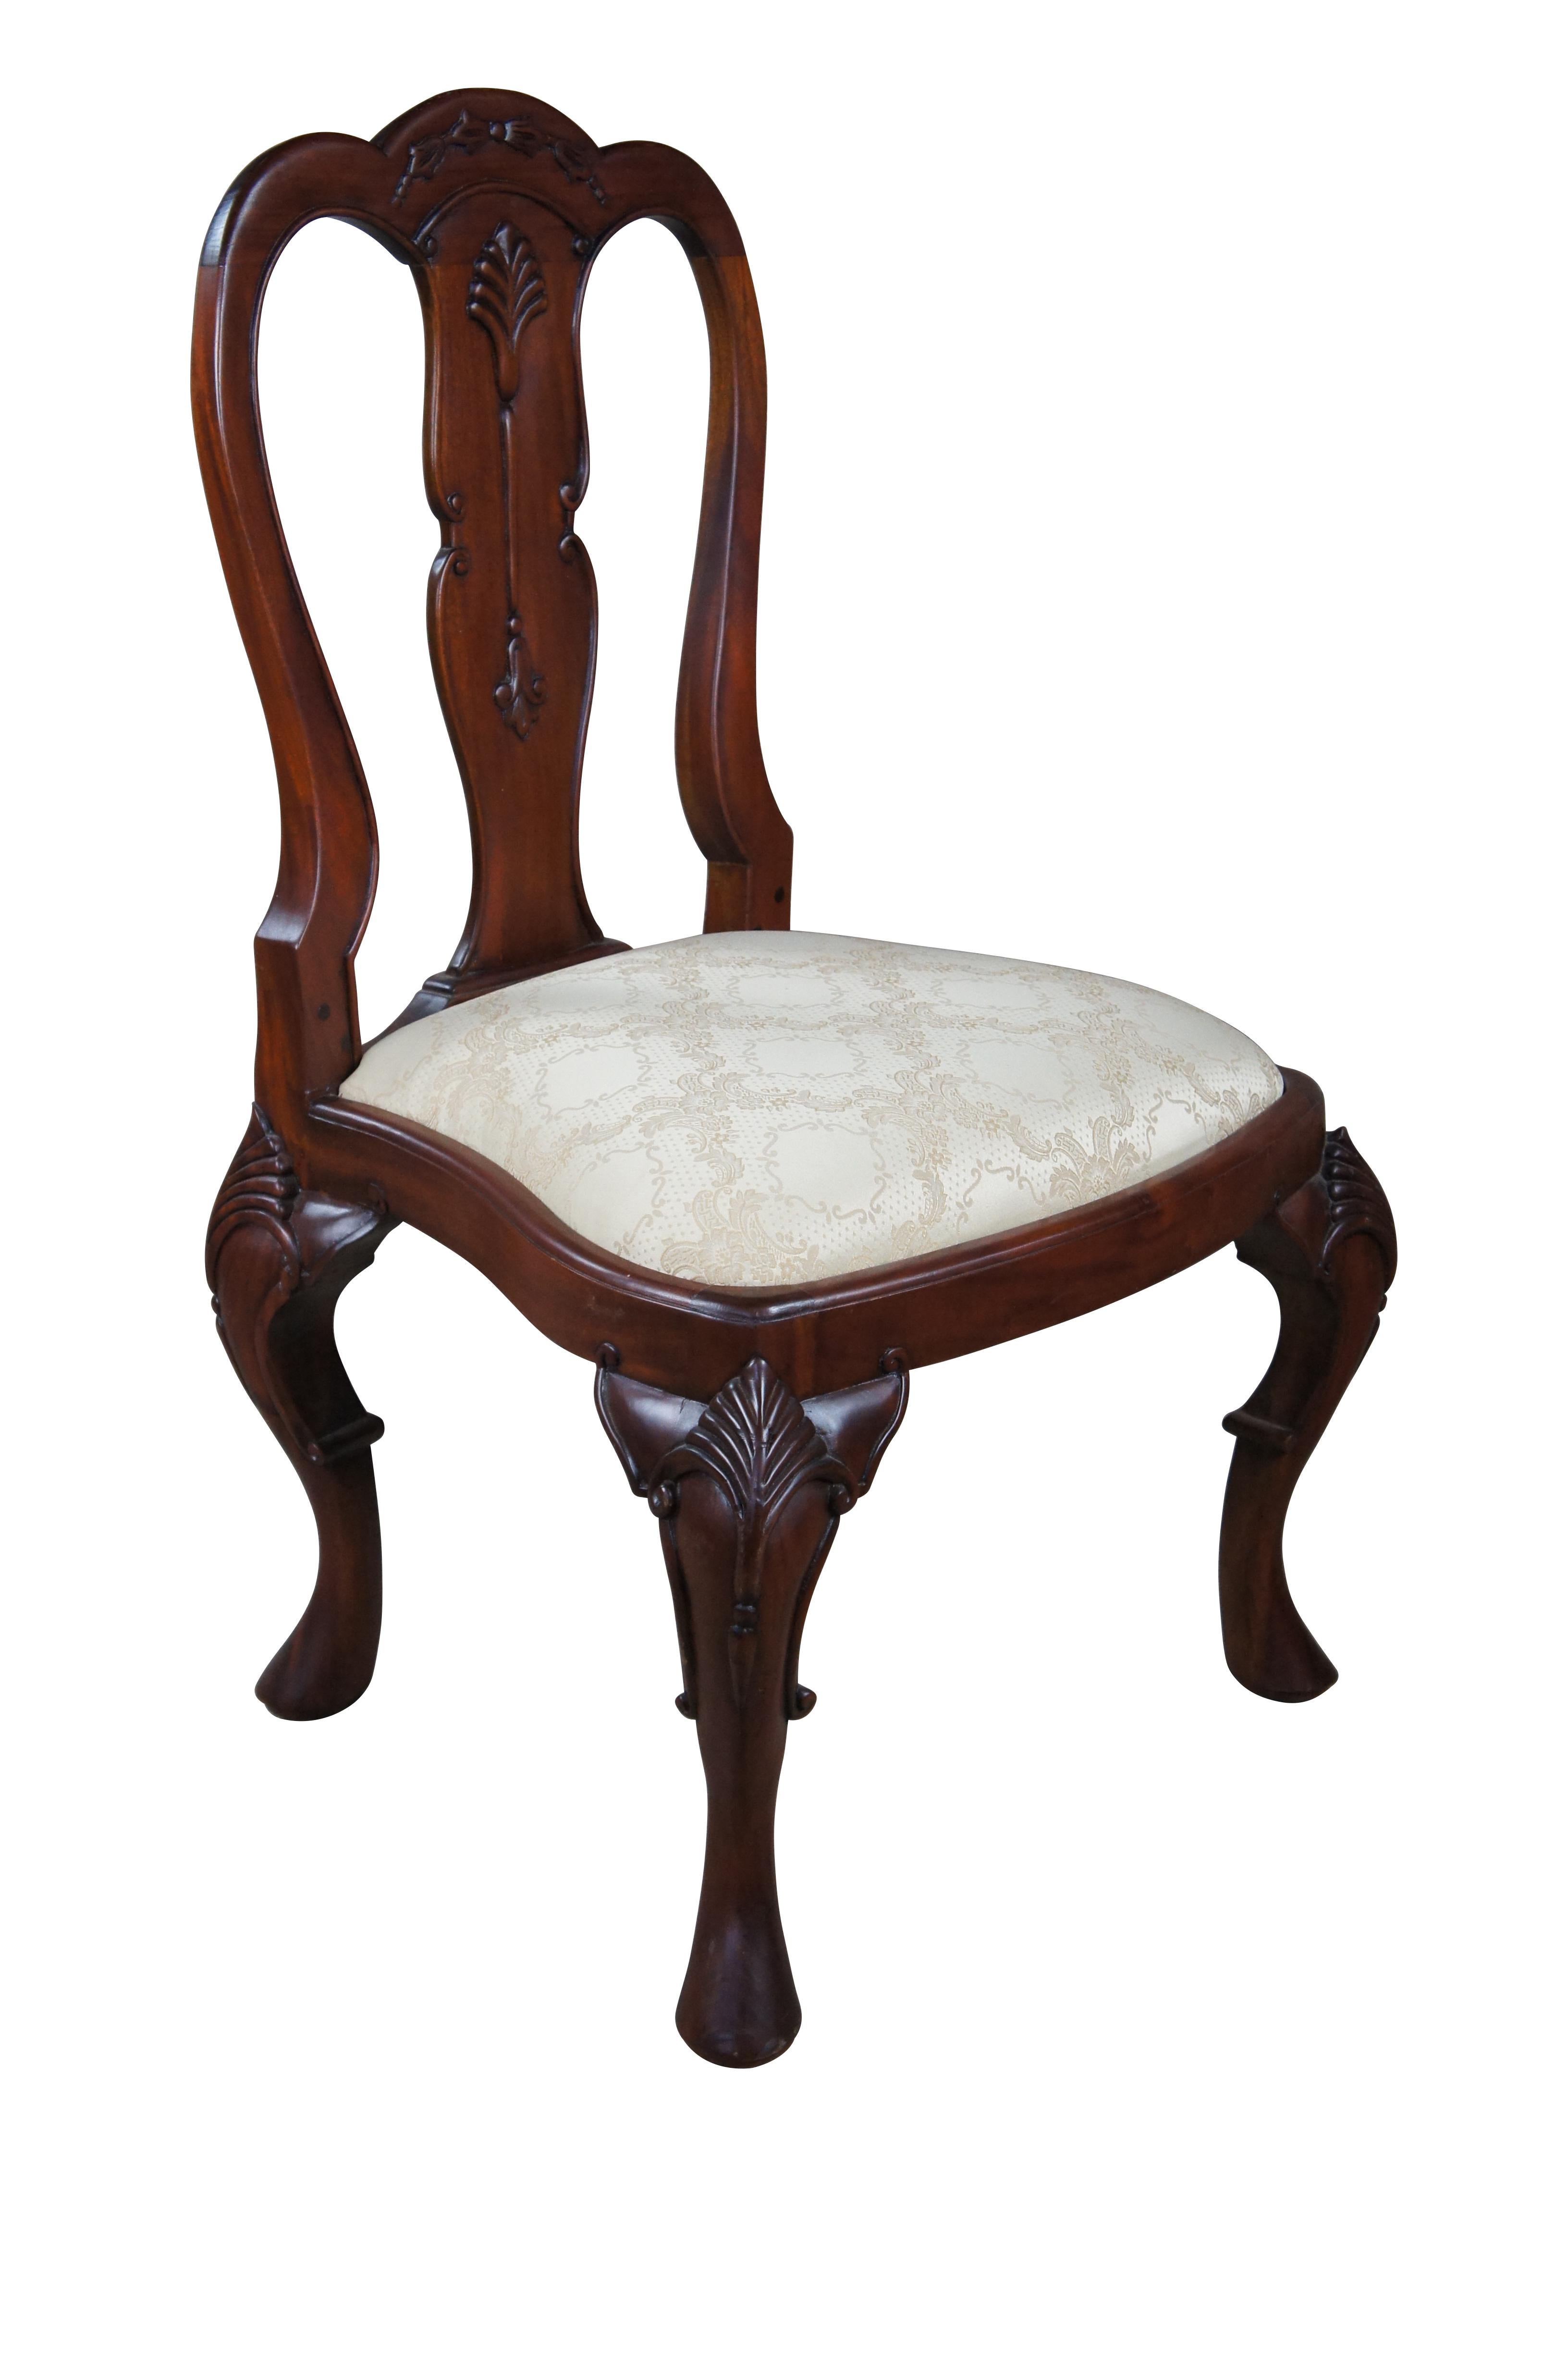 An ornately carved mahogany Georgian style side chair.  Features a carved back splat, silk brocade seat and pronounced cabriole legs with scalloped knees.

Dimensions:

25